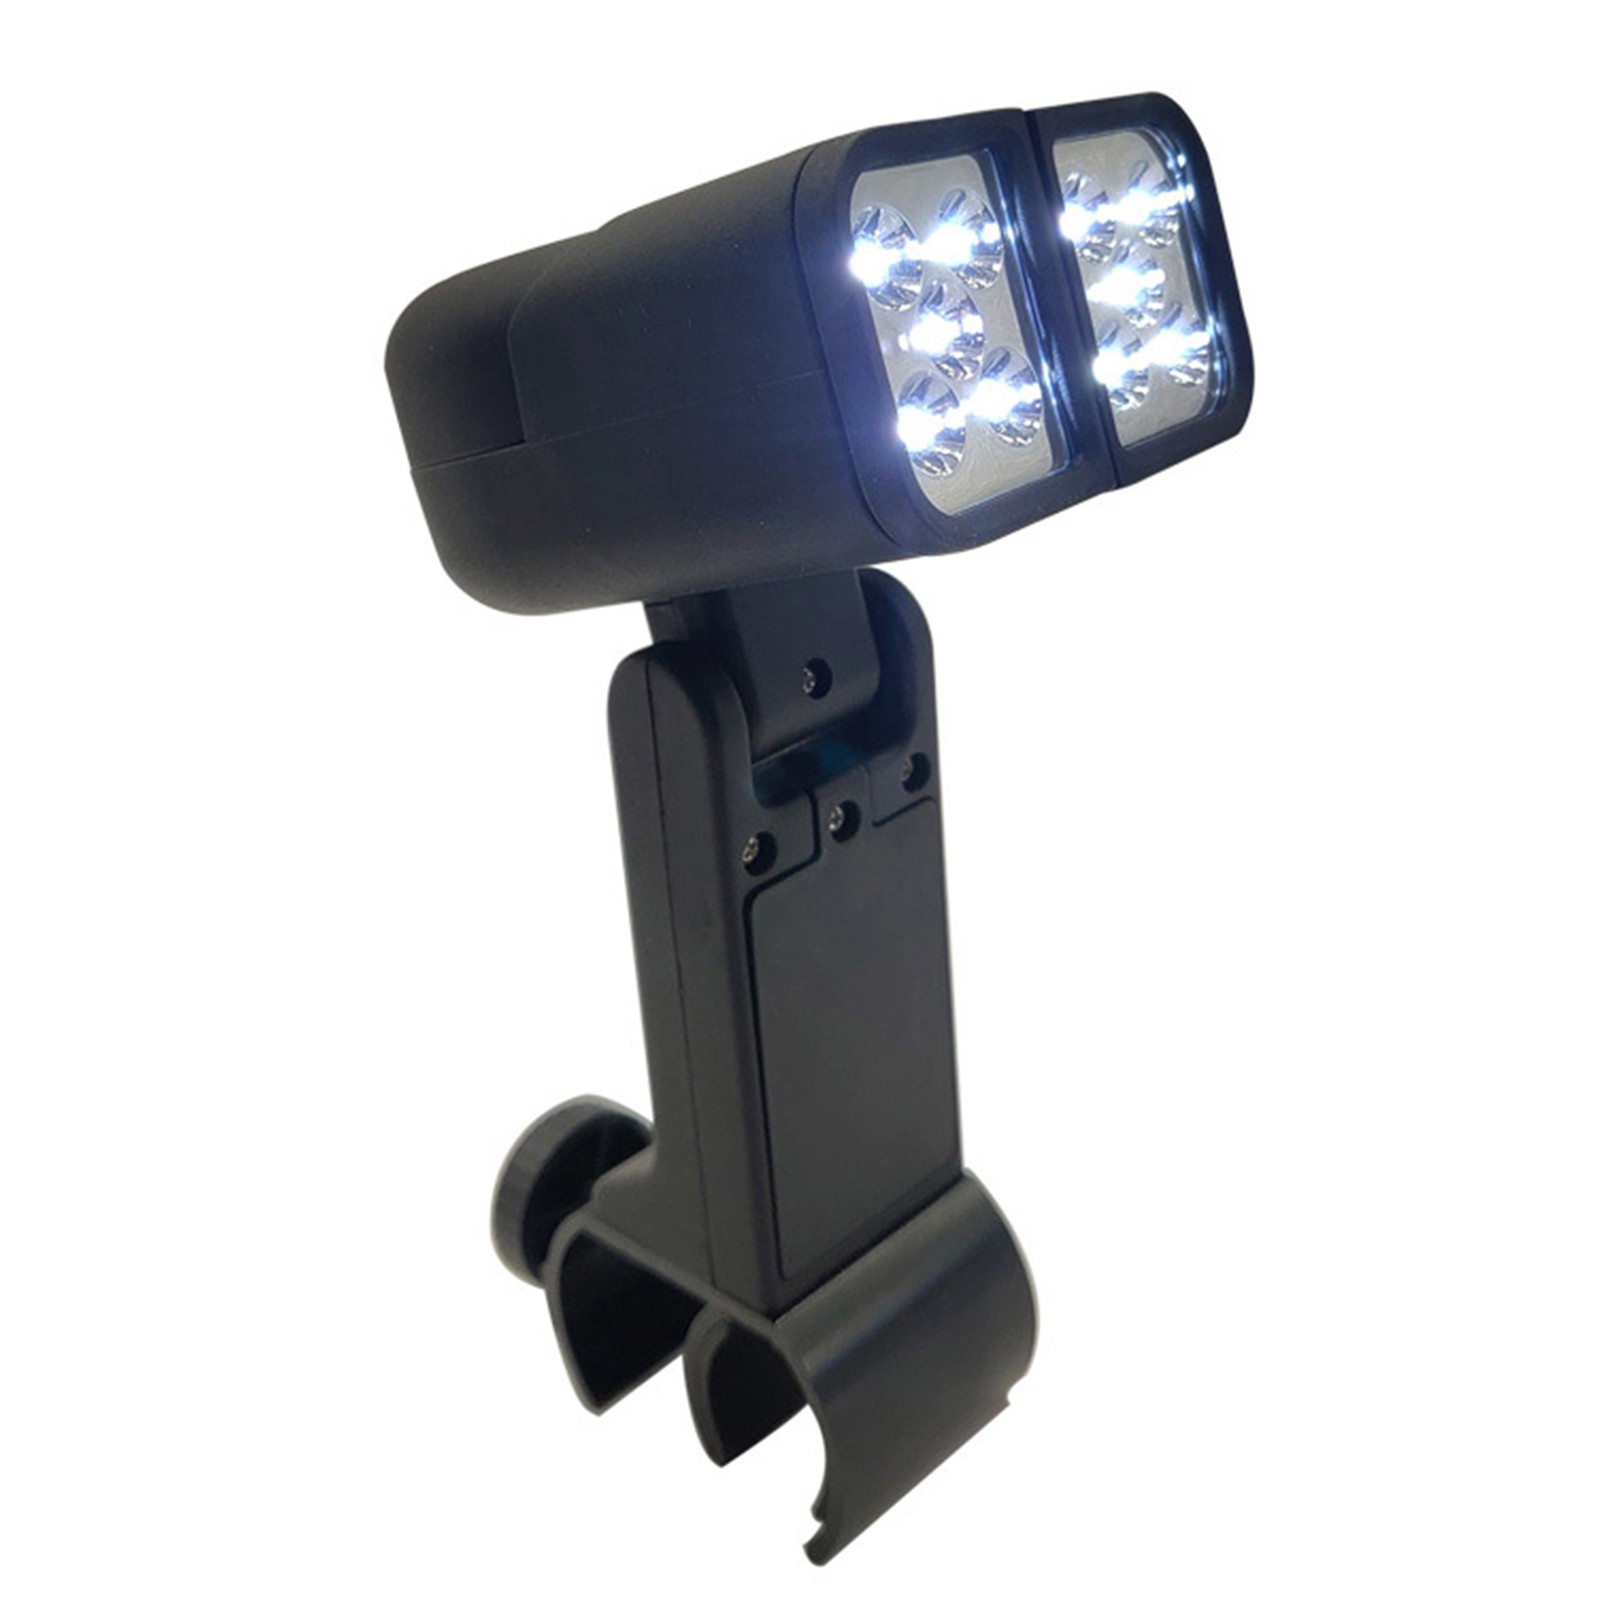 Bbq Grill Light Outdoor Super Bright LED Lamp Base Barbecue with 10 Super Bright - image 4 of 4